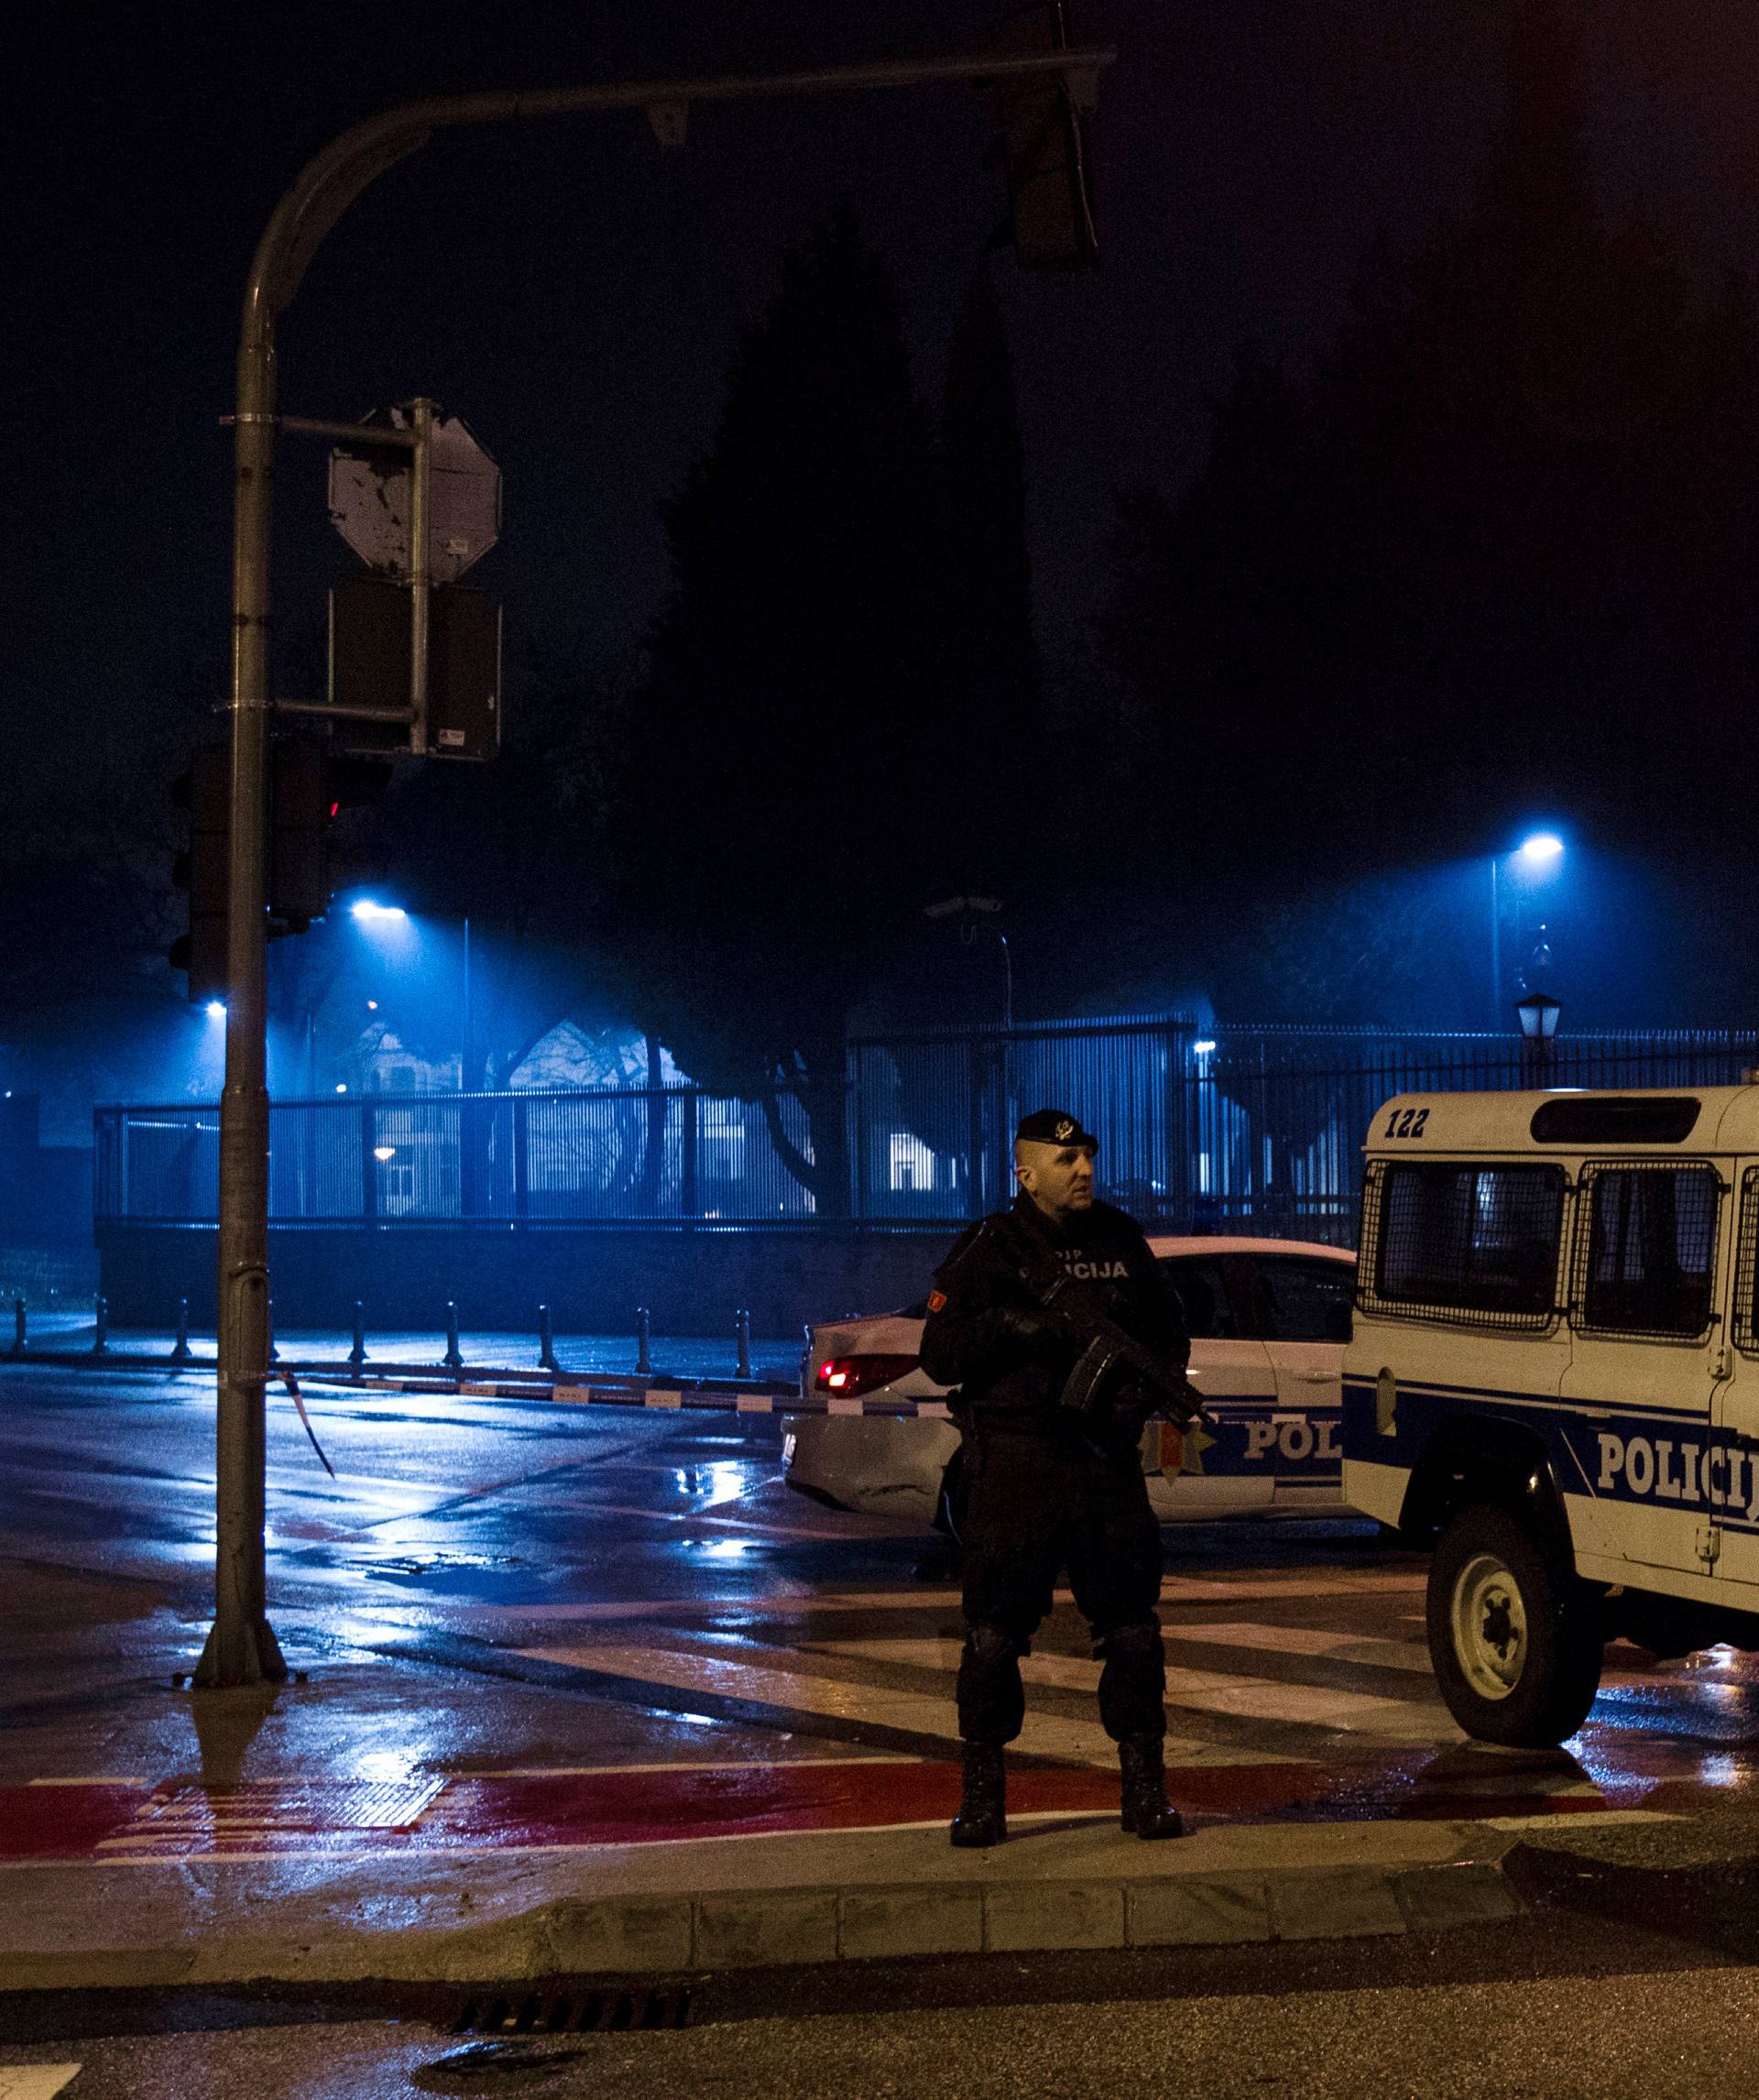 Police guard the entrance to the United States embassy building in Podgorica